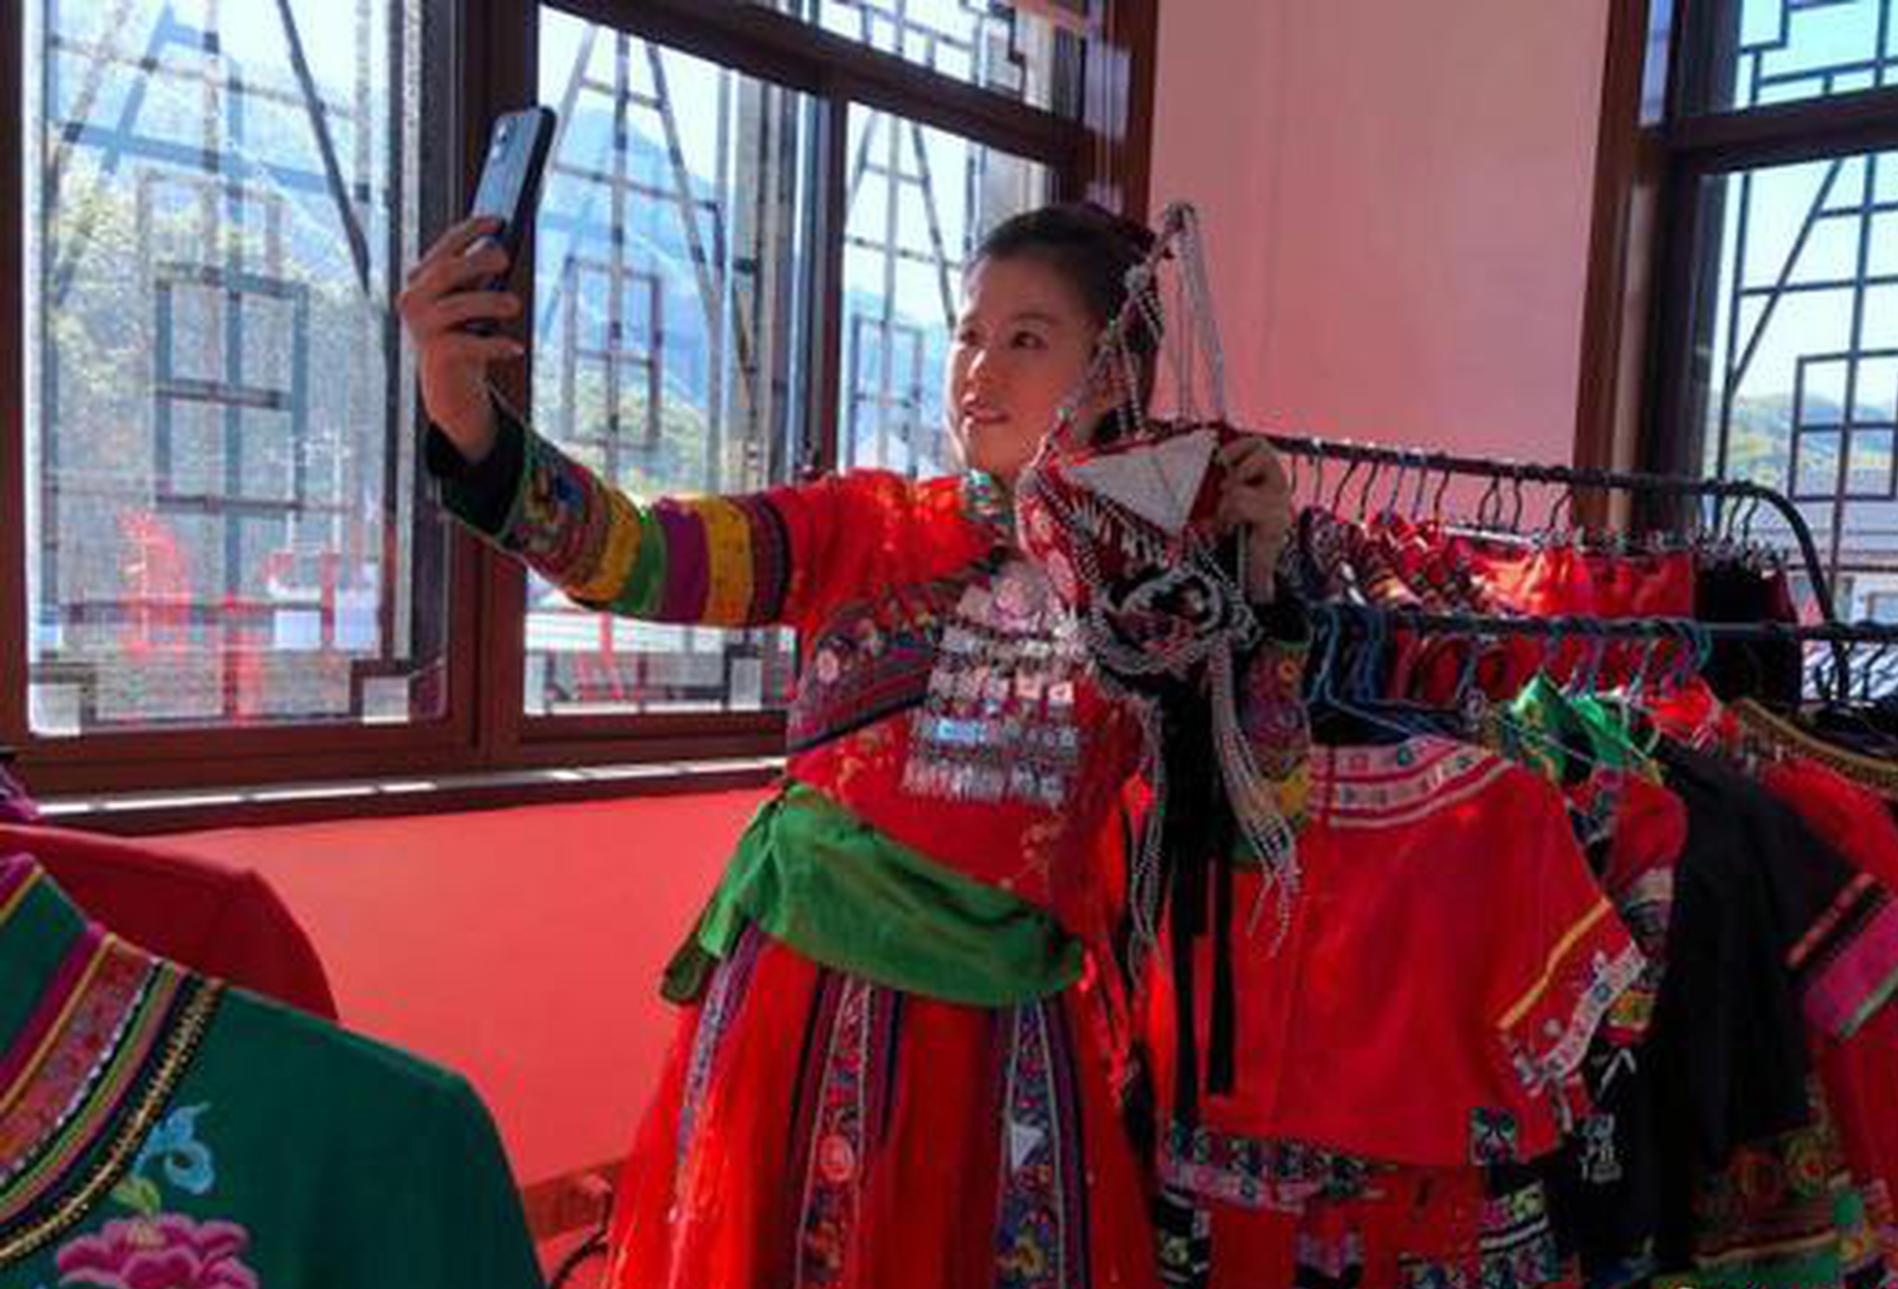 She ethnic craftswoman weaves dream into colored ribbons